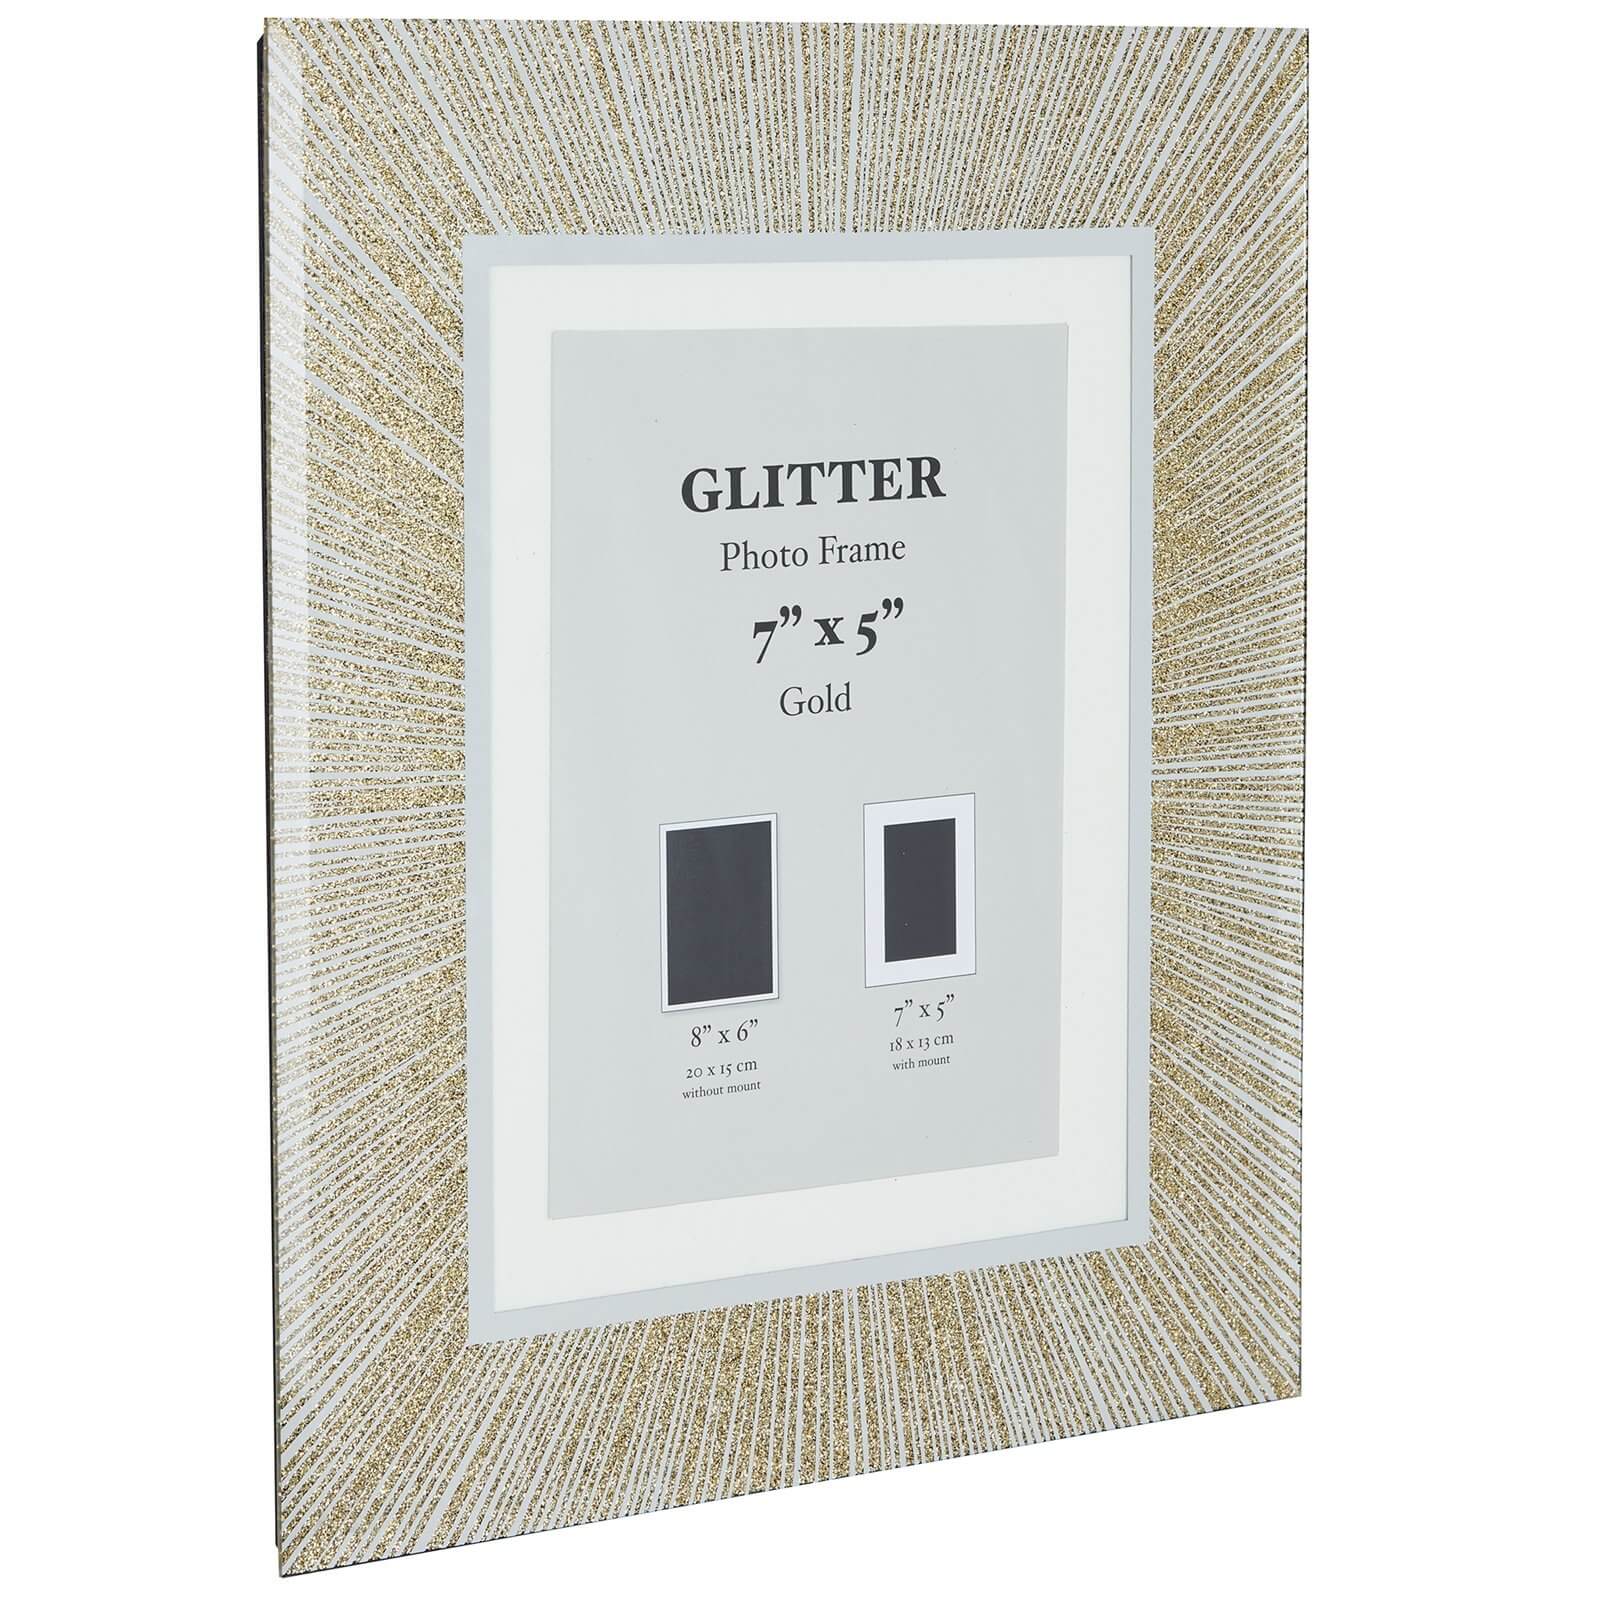 Glitter Picture Frame 7 x 5 - Gold